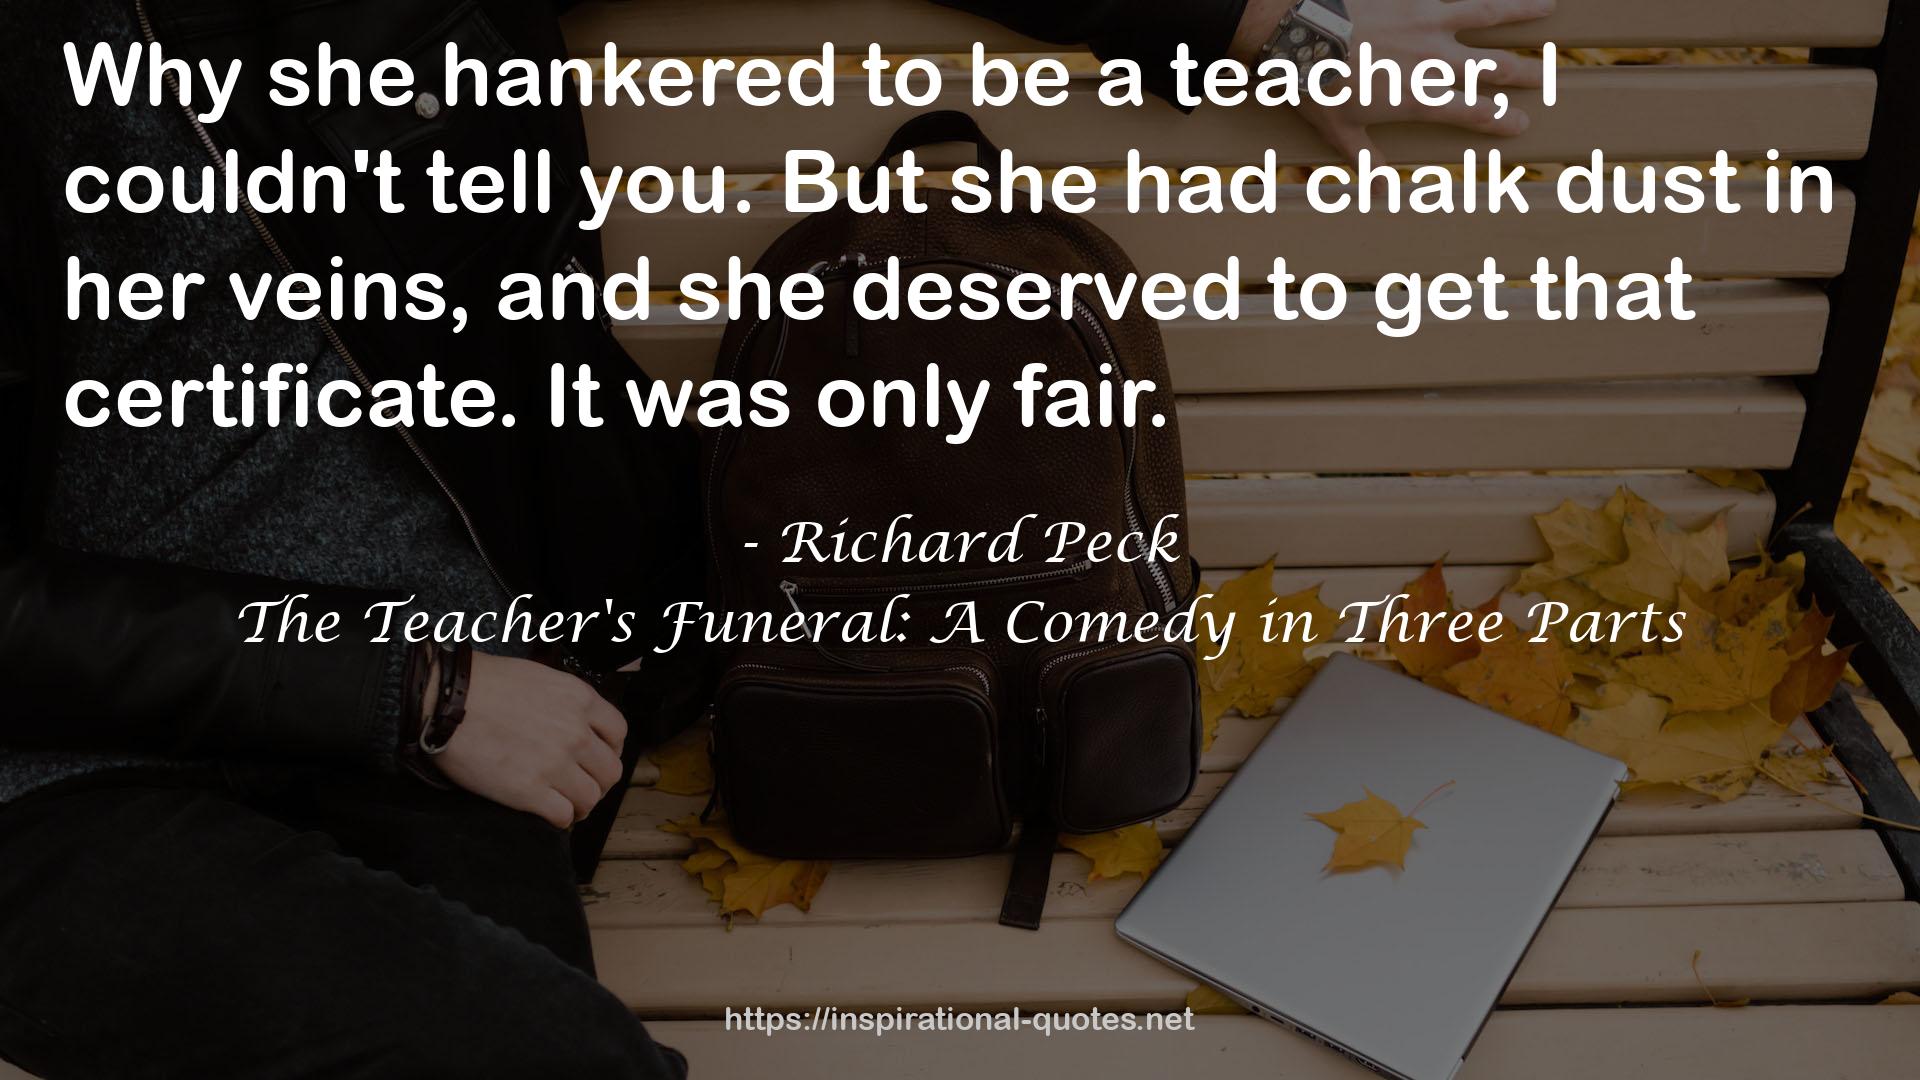 The Teacher's Funeral: A Comedy in Three Parts QUOTES